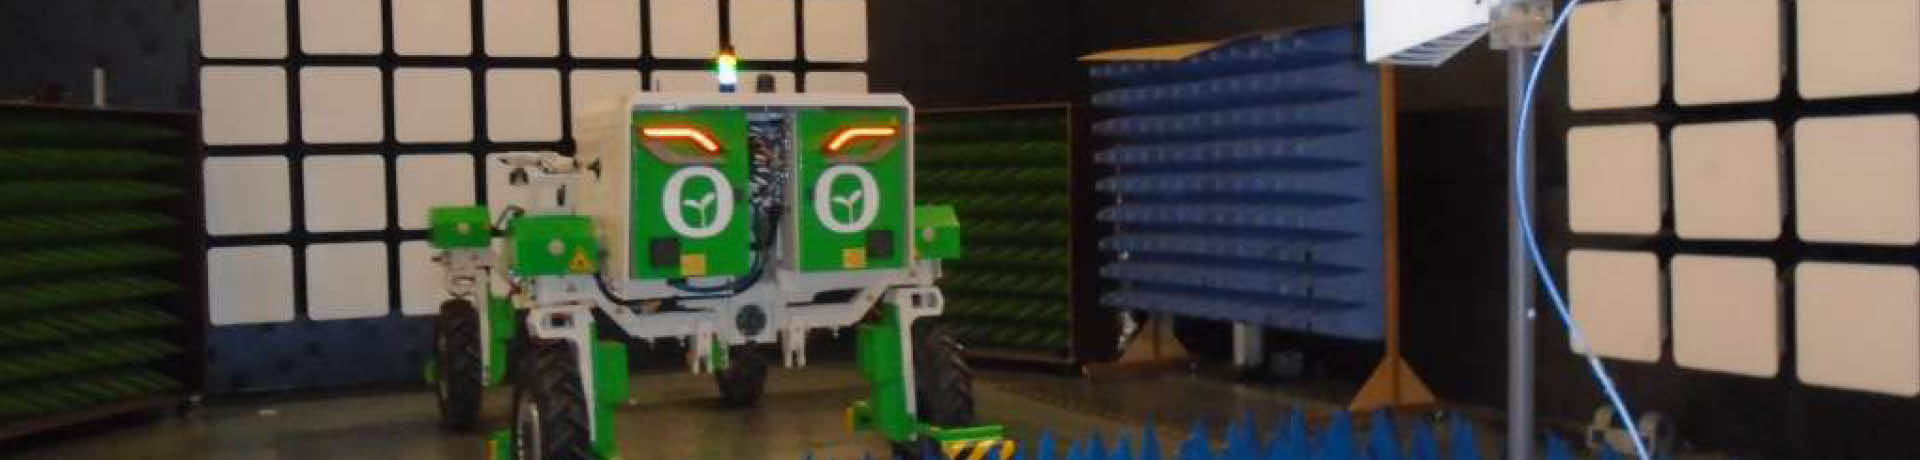 Robot in a EMC cage